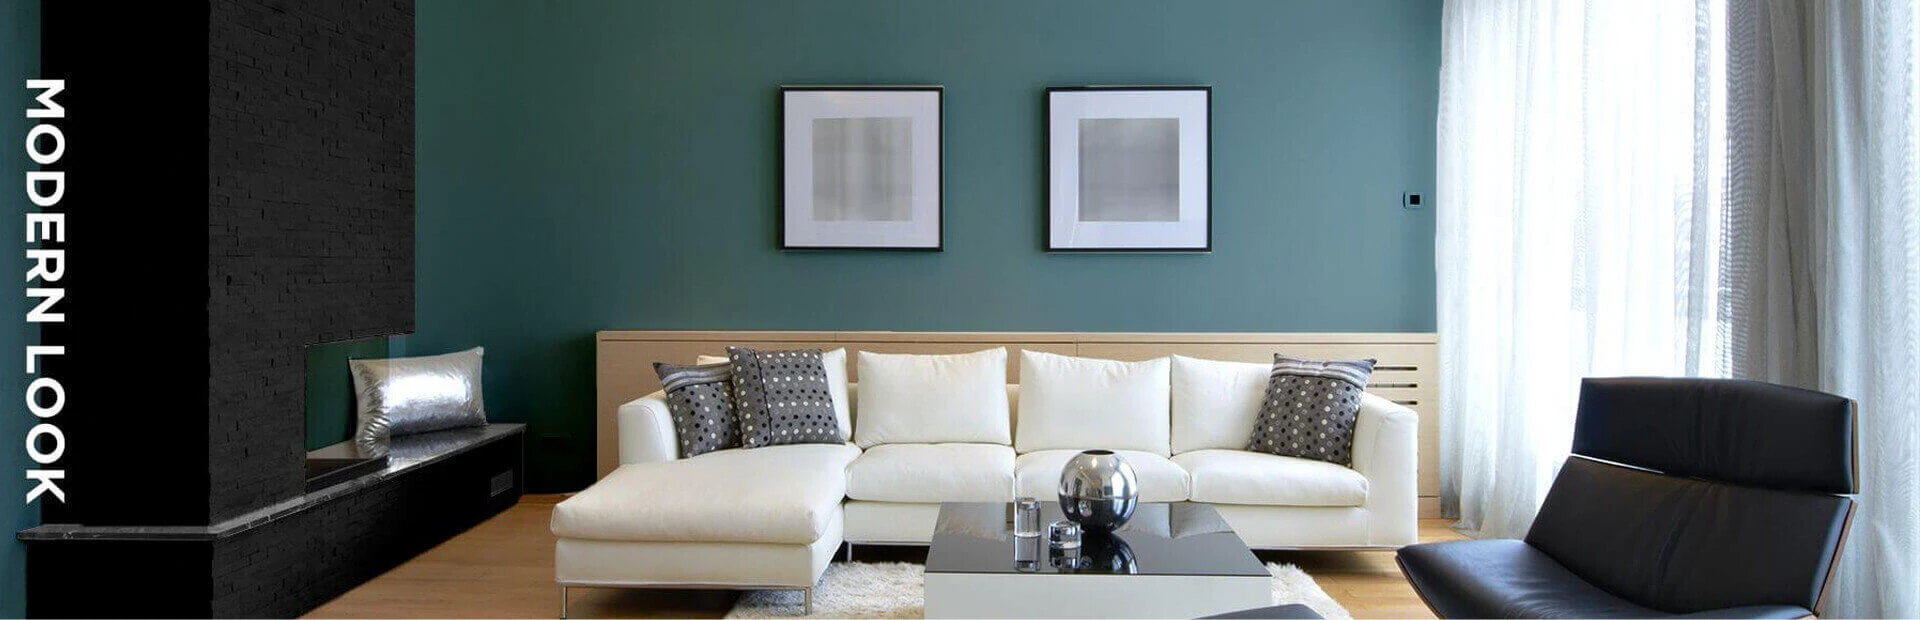 Living Room in dark neutral colors featuring furniture and paintings on walls.